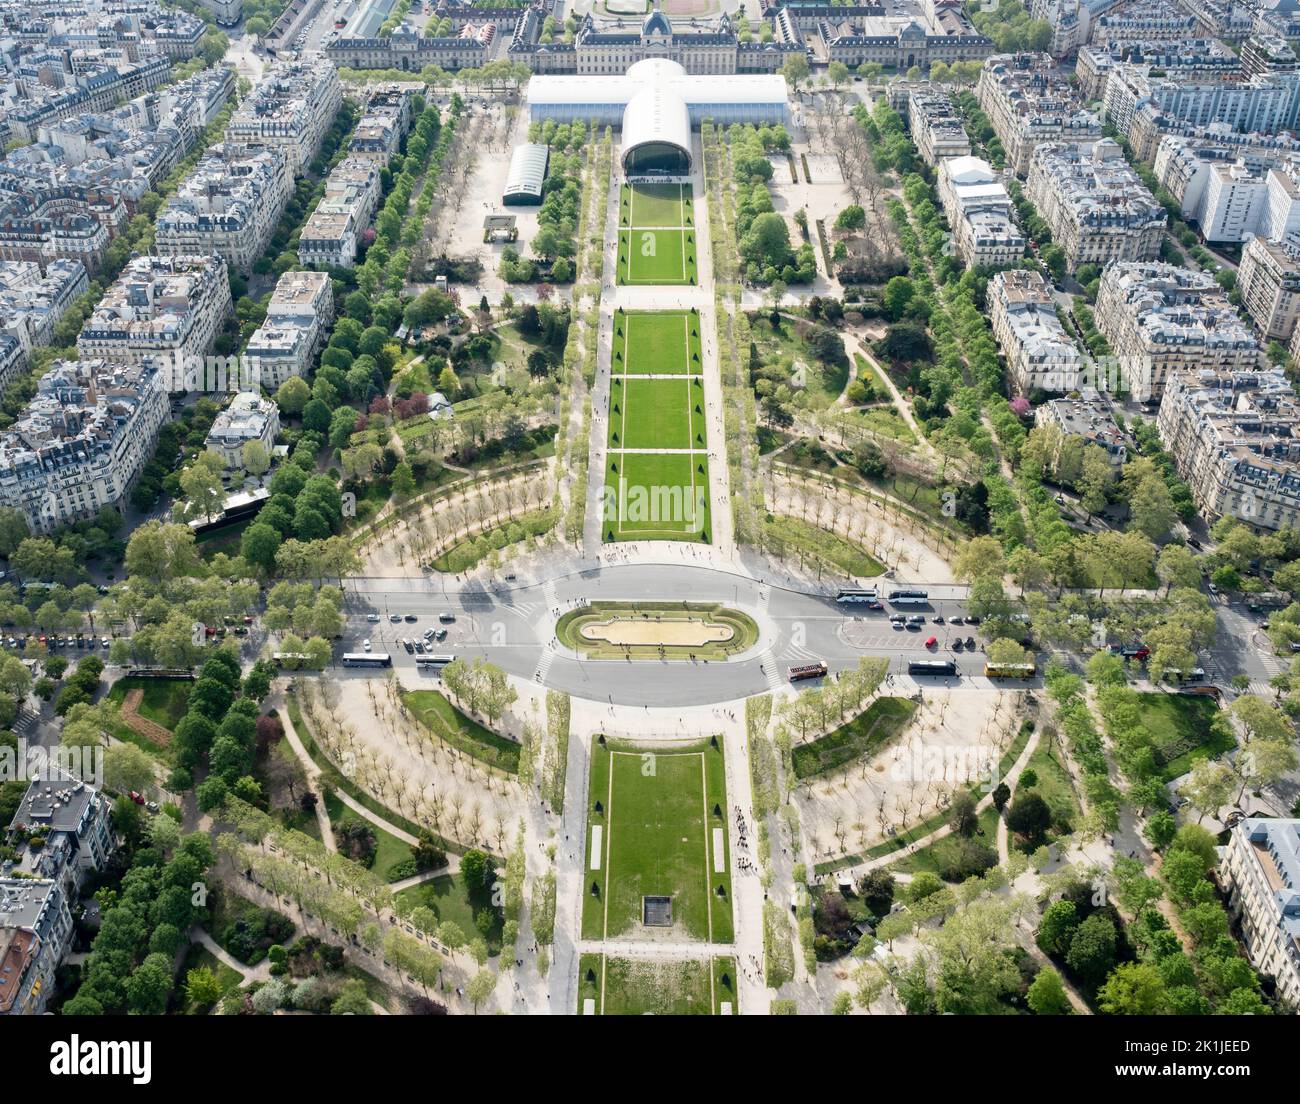 Paris, France - 18 April 2022: View from above to Champ de Mars, looking from Eiffel Tower towards southeast direction to the École Militaire. Stock Photo